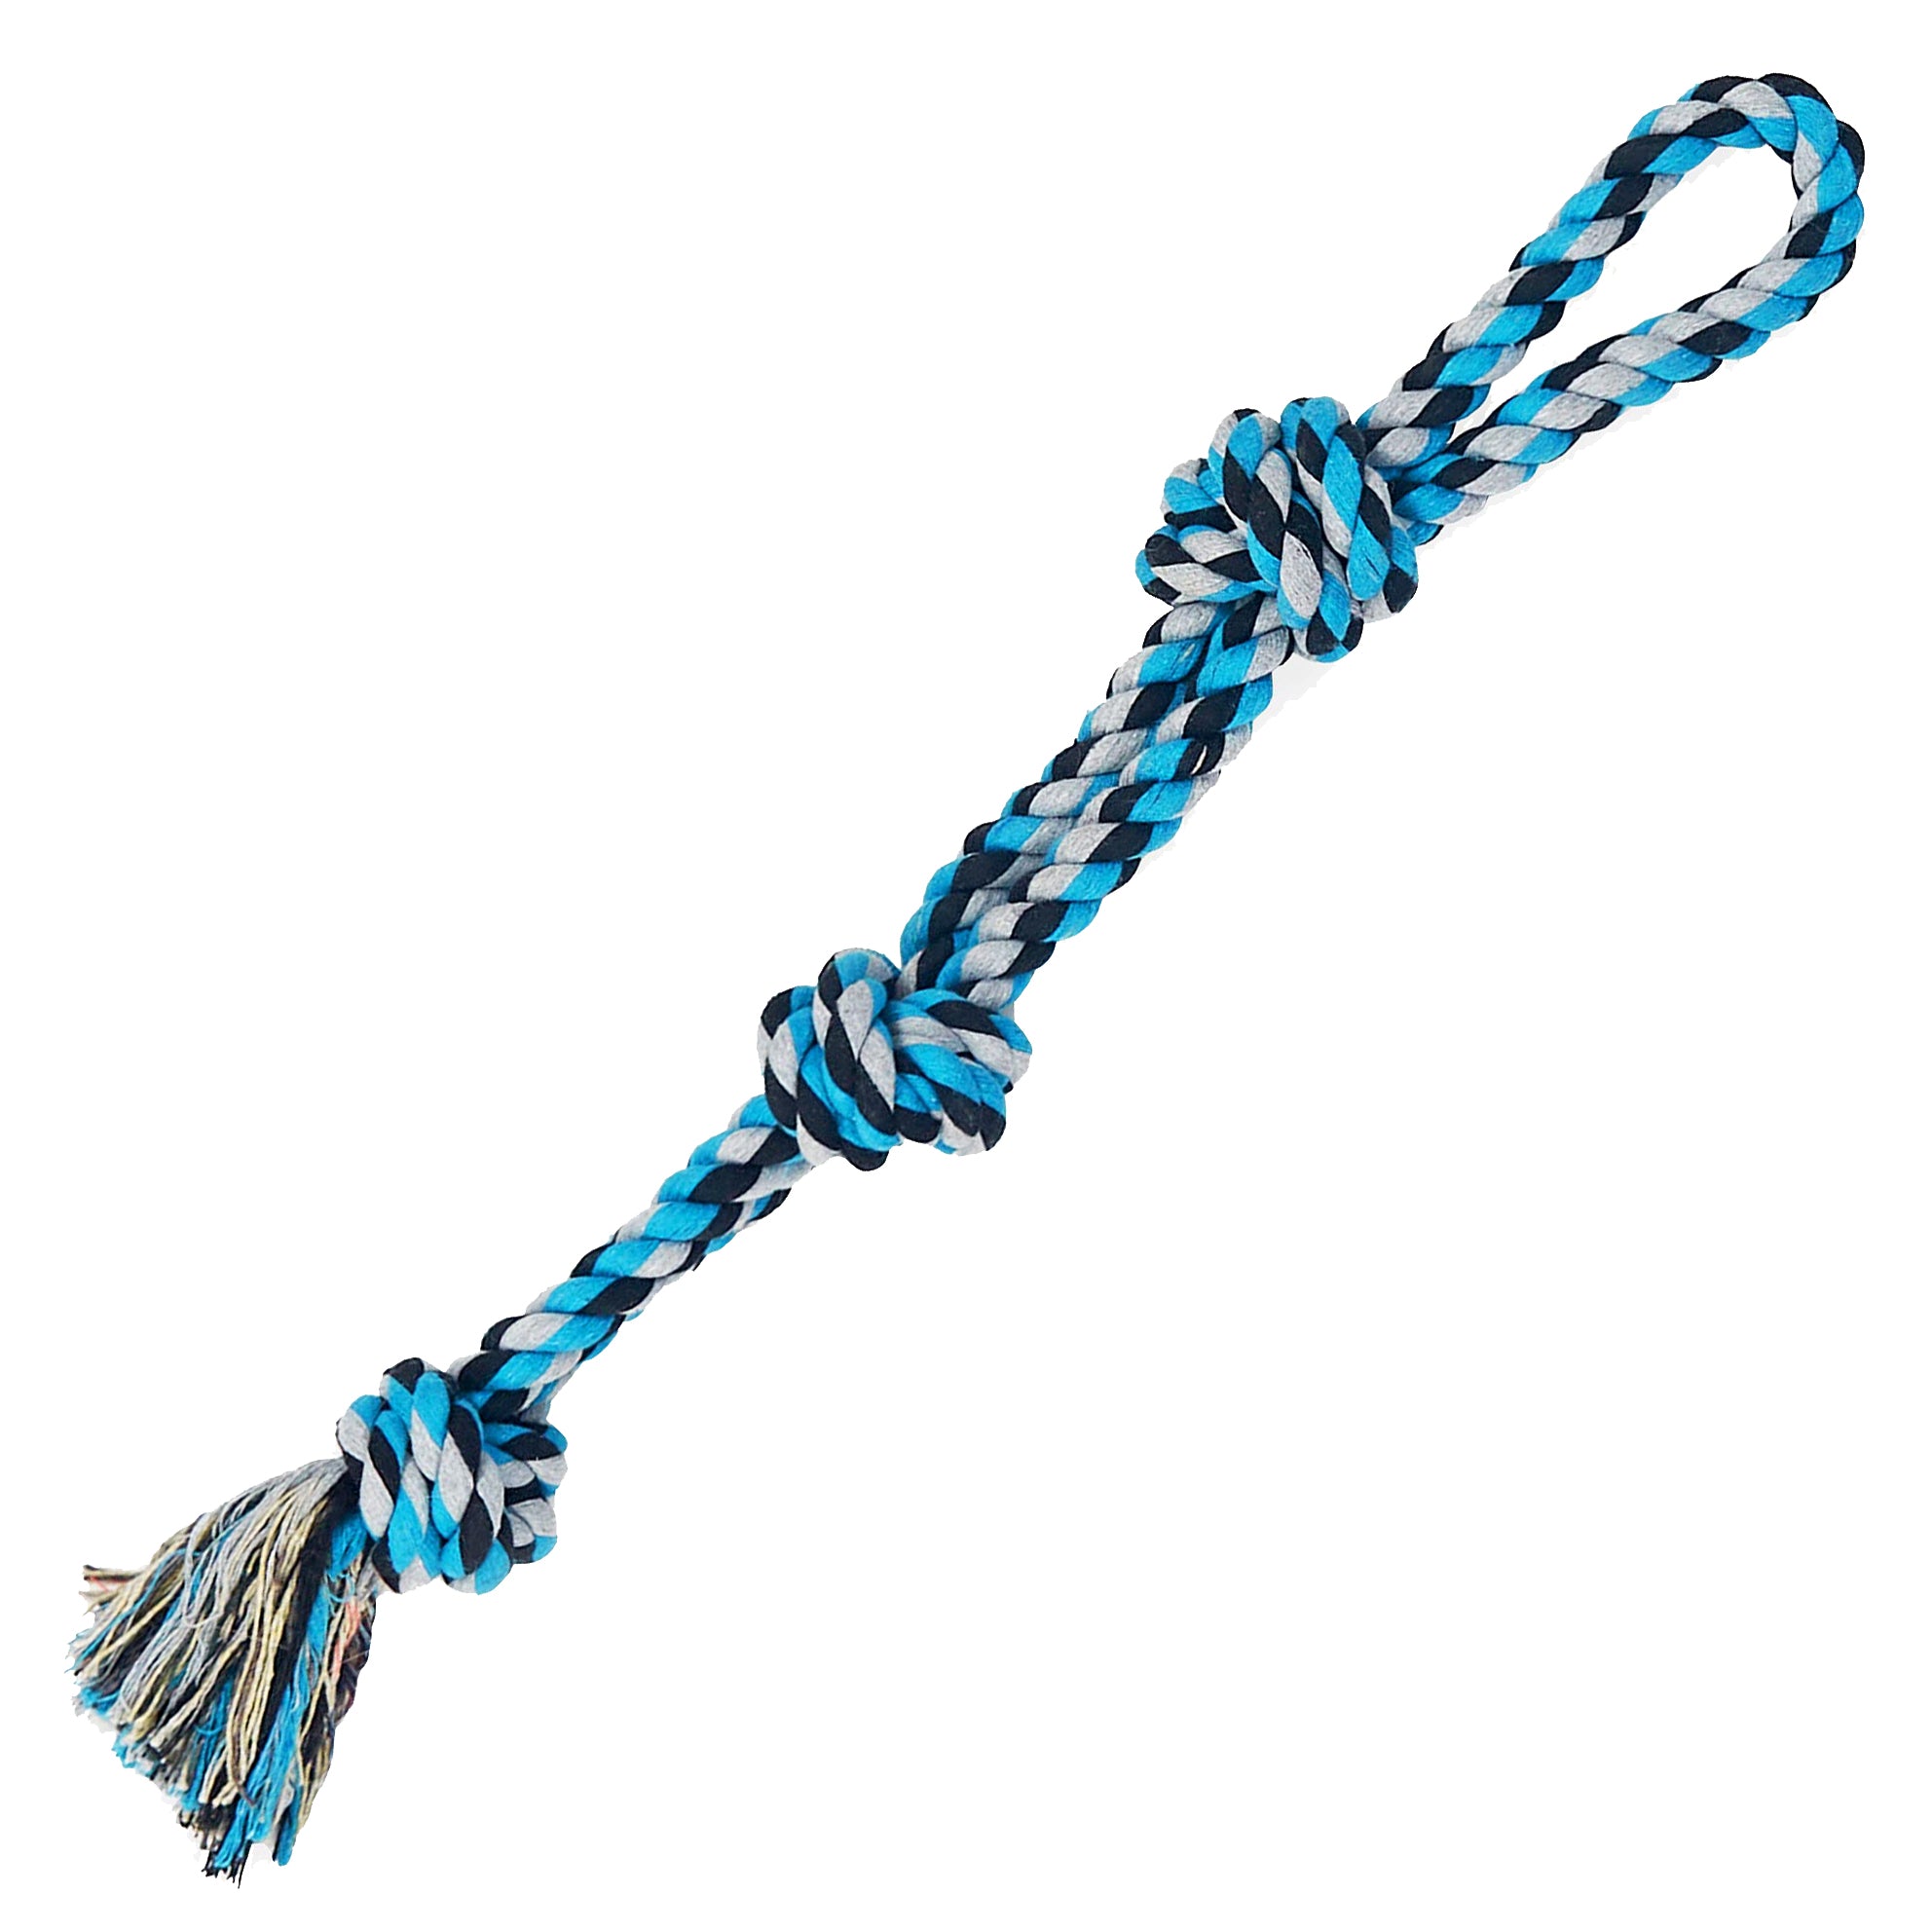 AMZpets Dog Toys for Aggressive Chewers, Dog Accessories Ropes for Medium or Large Breed, Knotted, Heavy Rope for Tug of War, Fetch, Teething, Choose Options: 2 Robe Balls with Handles, Rope Ball, 2 Large Ropes, Or 2 Medium Ropes